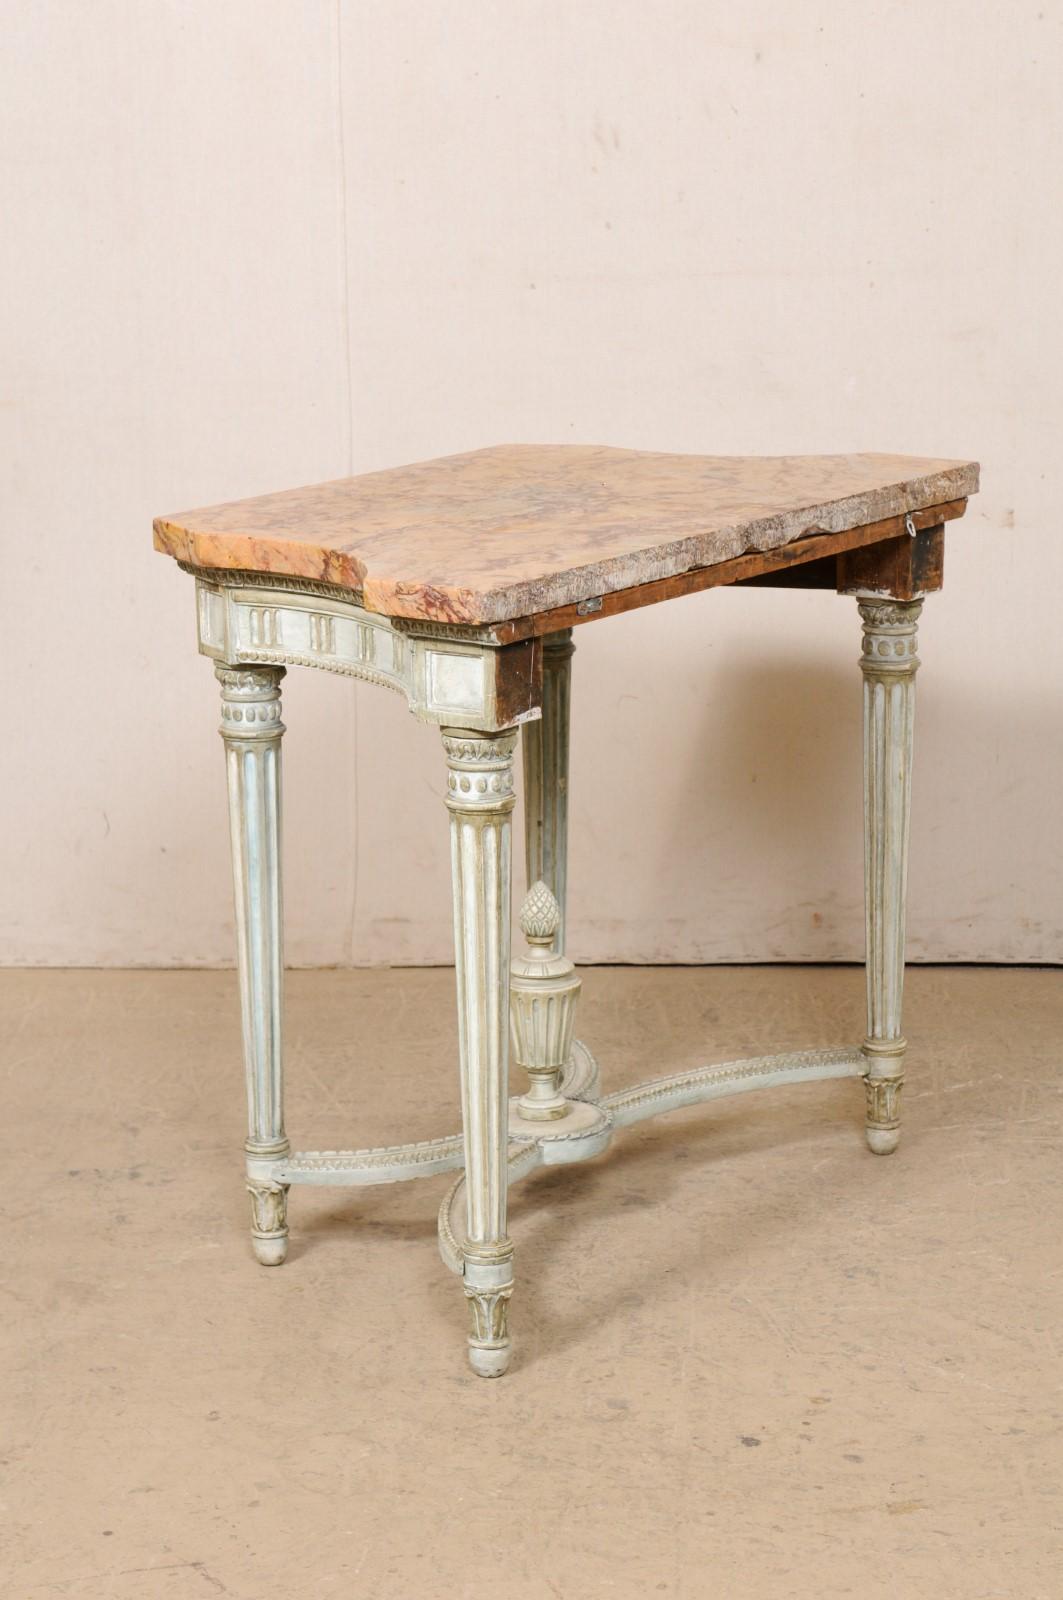 French Neoclassic Period Marble Top Console w/Carved Urn Finial at Underside For Sale 3